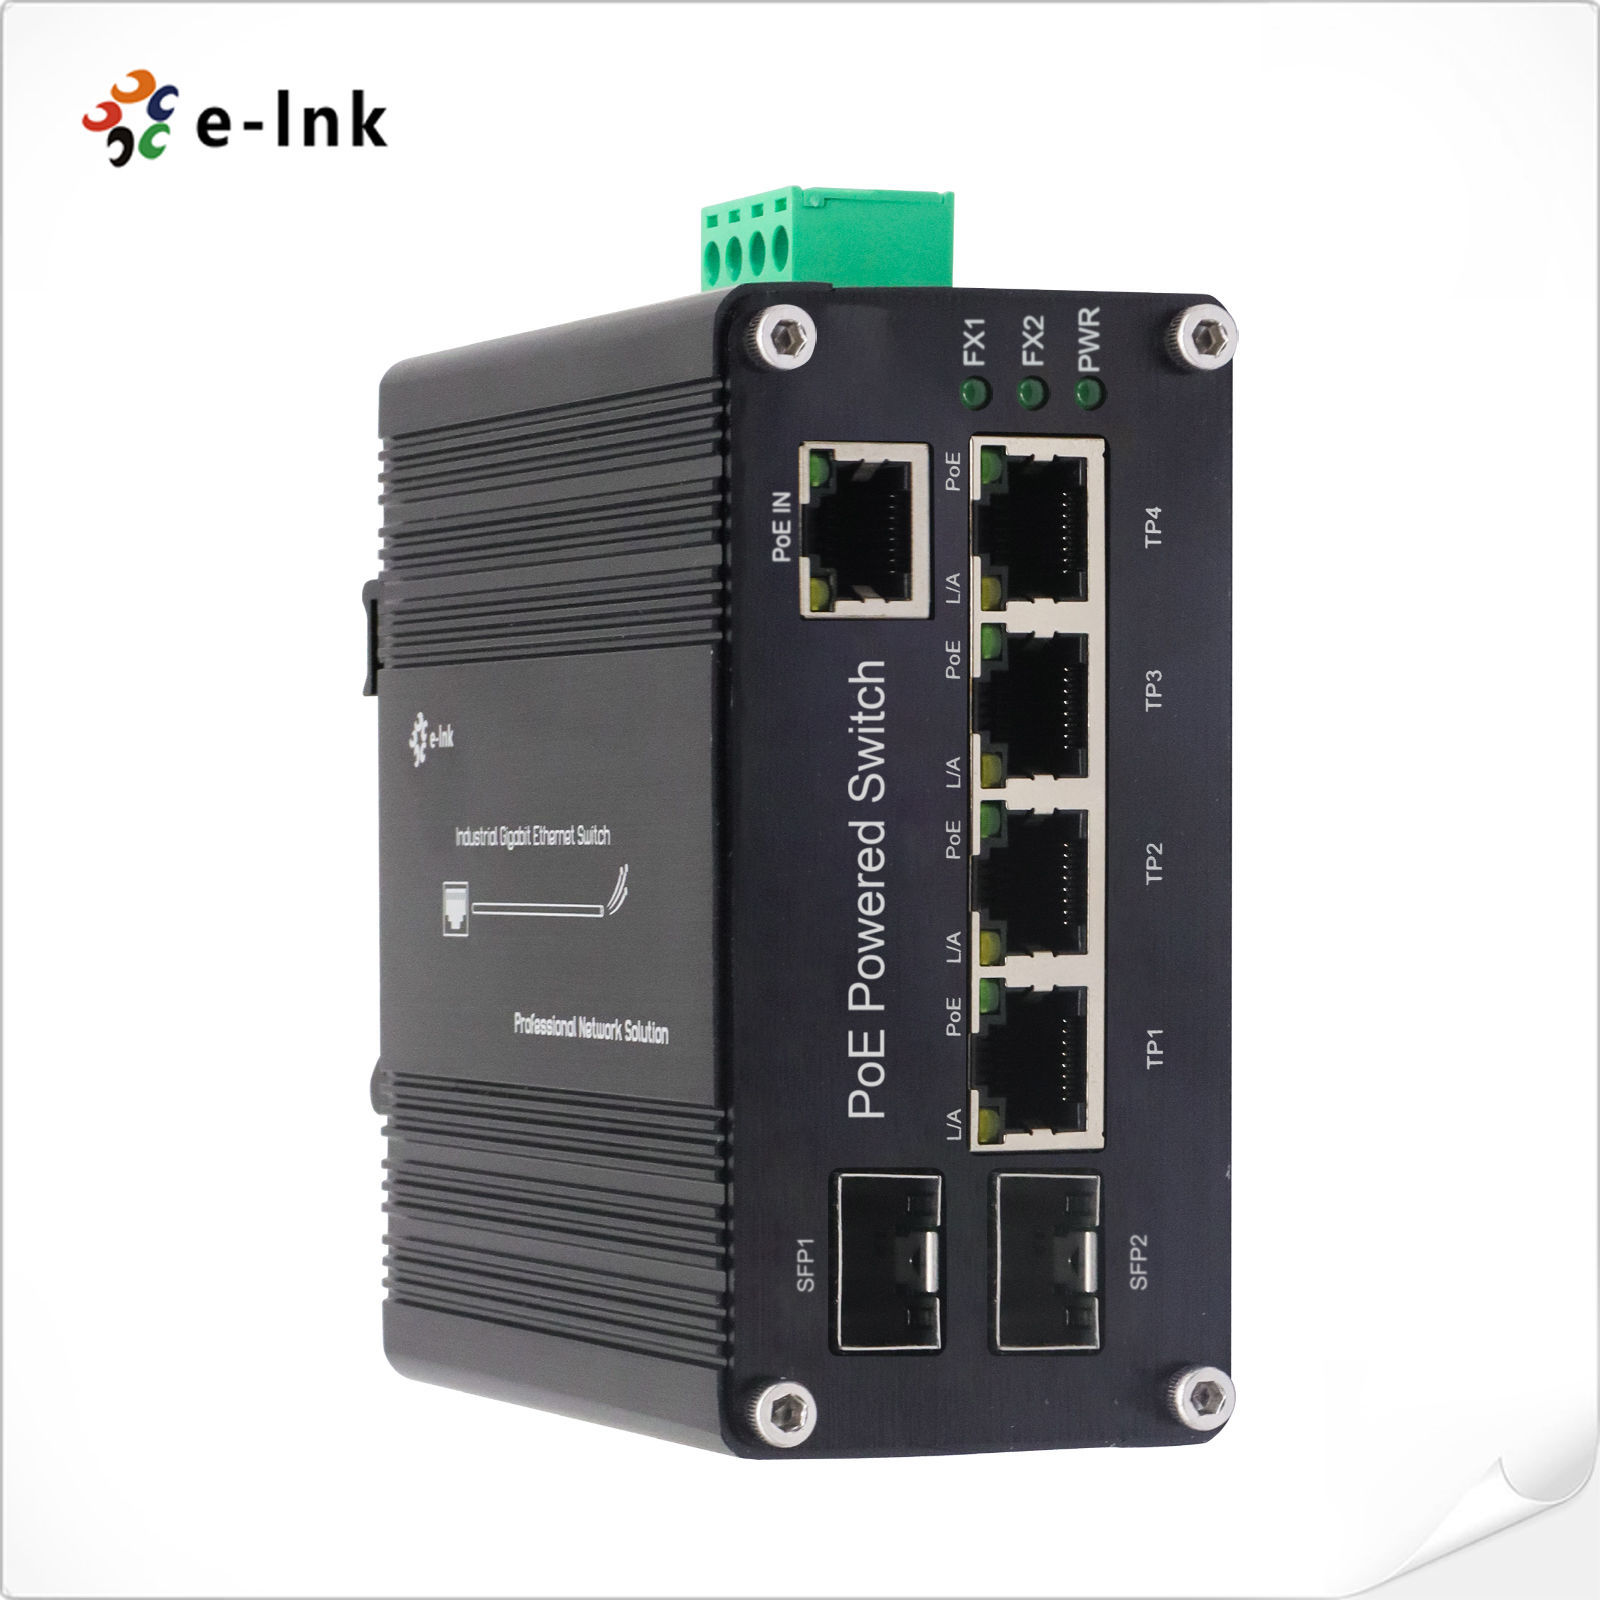 PoE Powered 5-Port Gigabit Switch with PoE Passthrough, switch poe